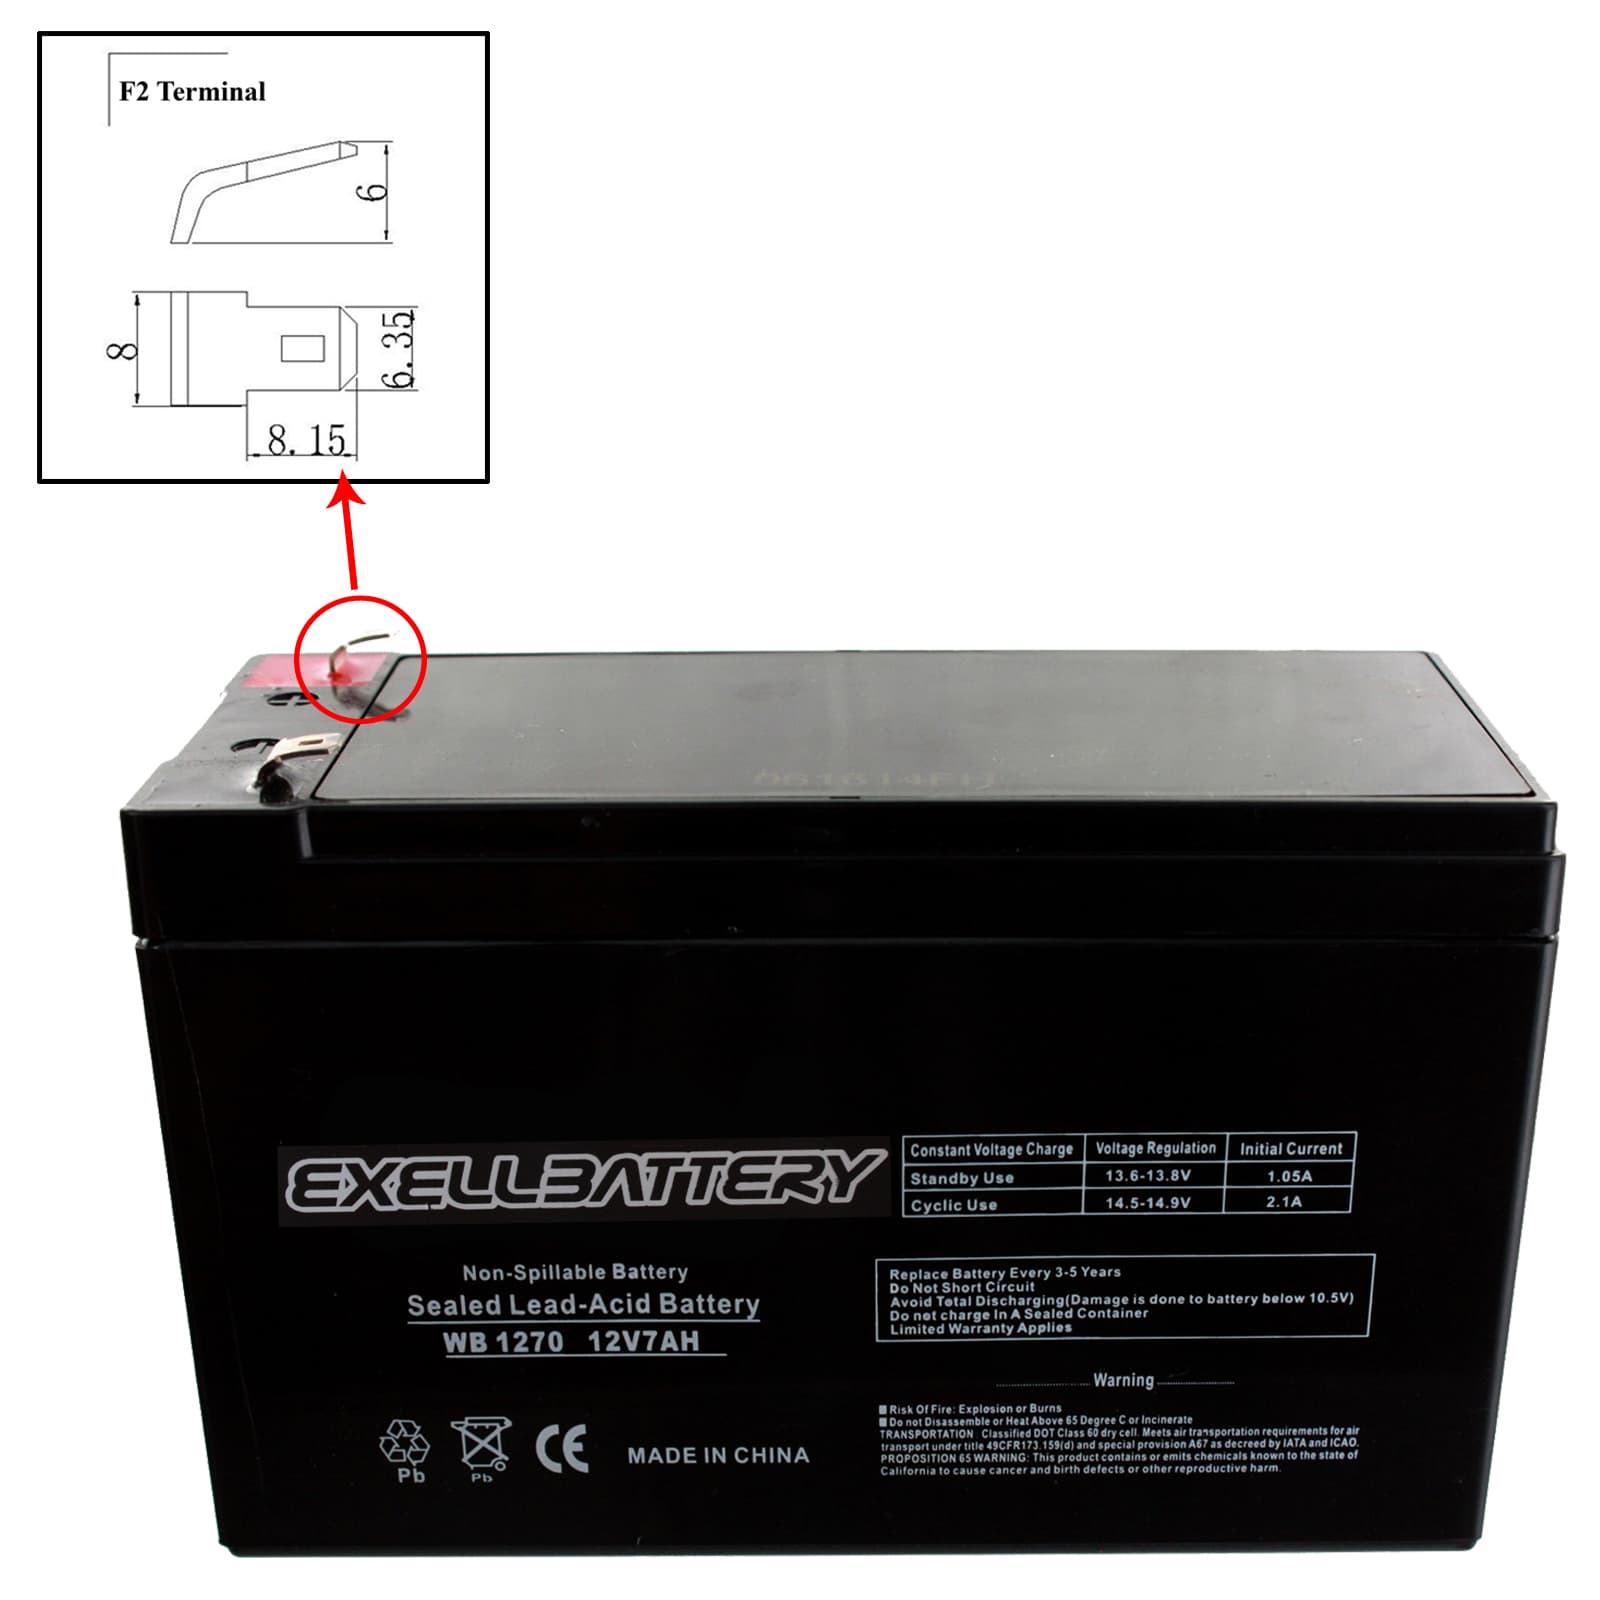 UB1270 VERIZON FIOS Compatible with BATTERY 12V 7AH SLA RECHARGEABLE BATTERY - image 1 of 2